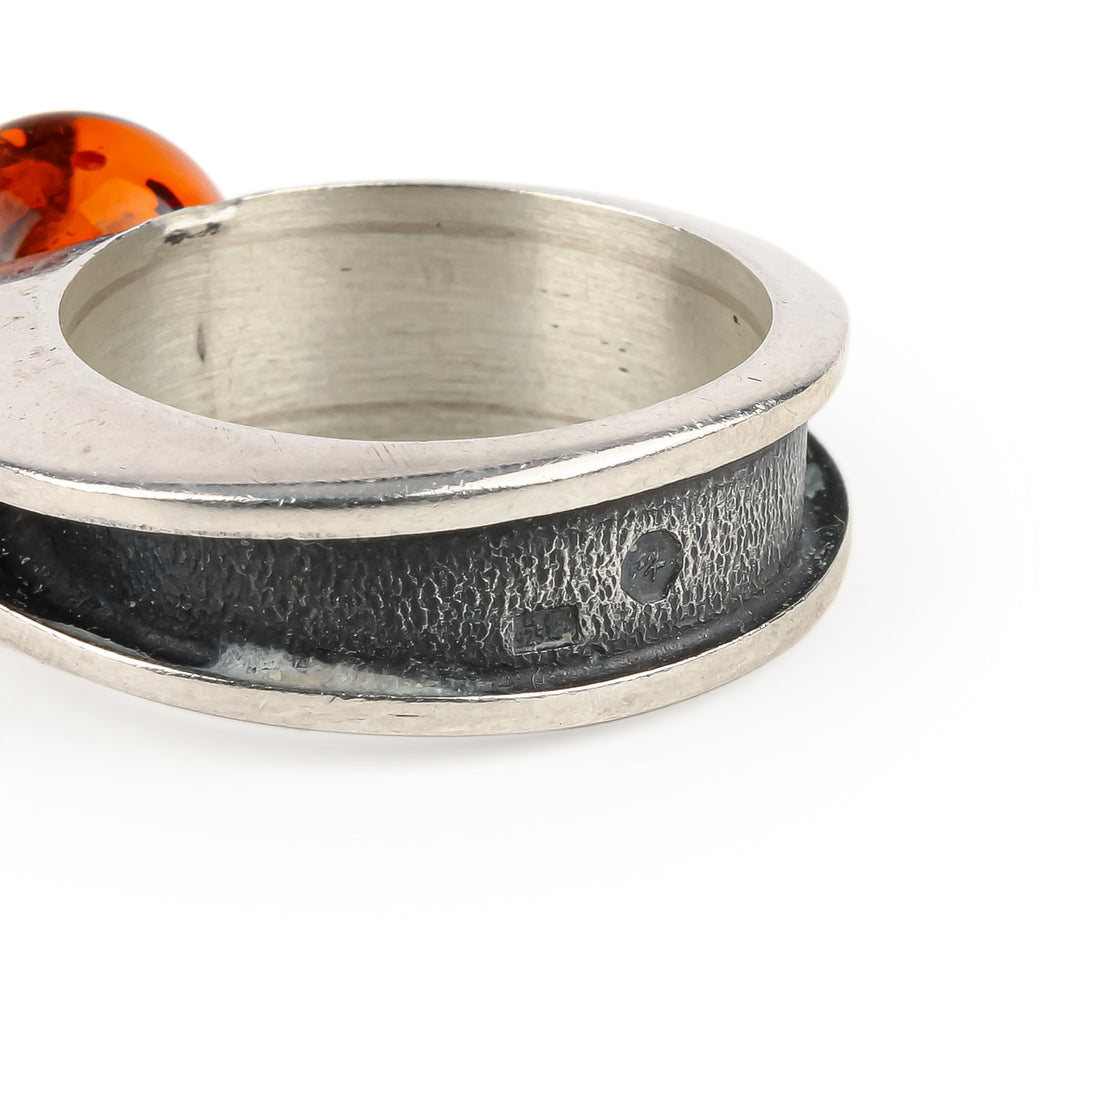 Polished Oxidized Sterling Silver Amber Bead Modernist Ring